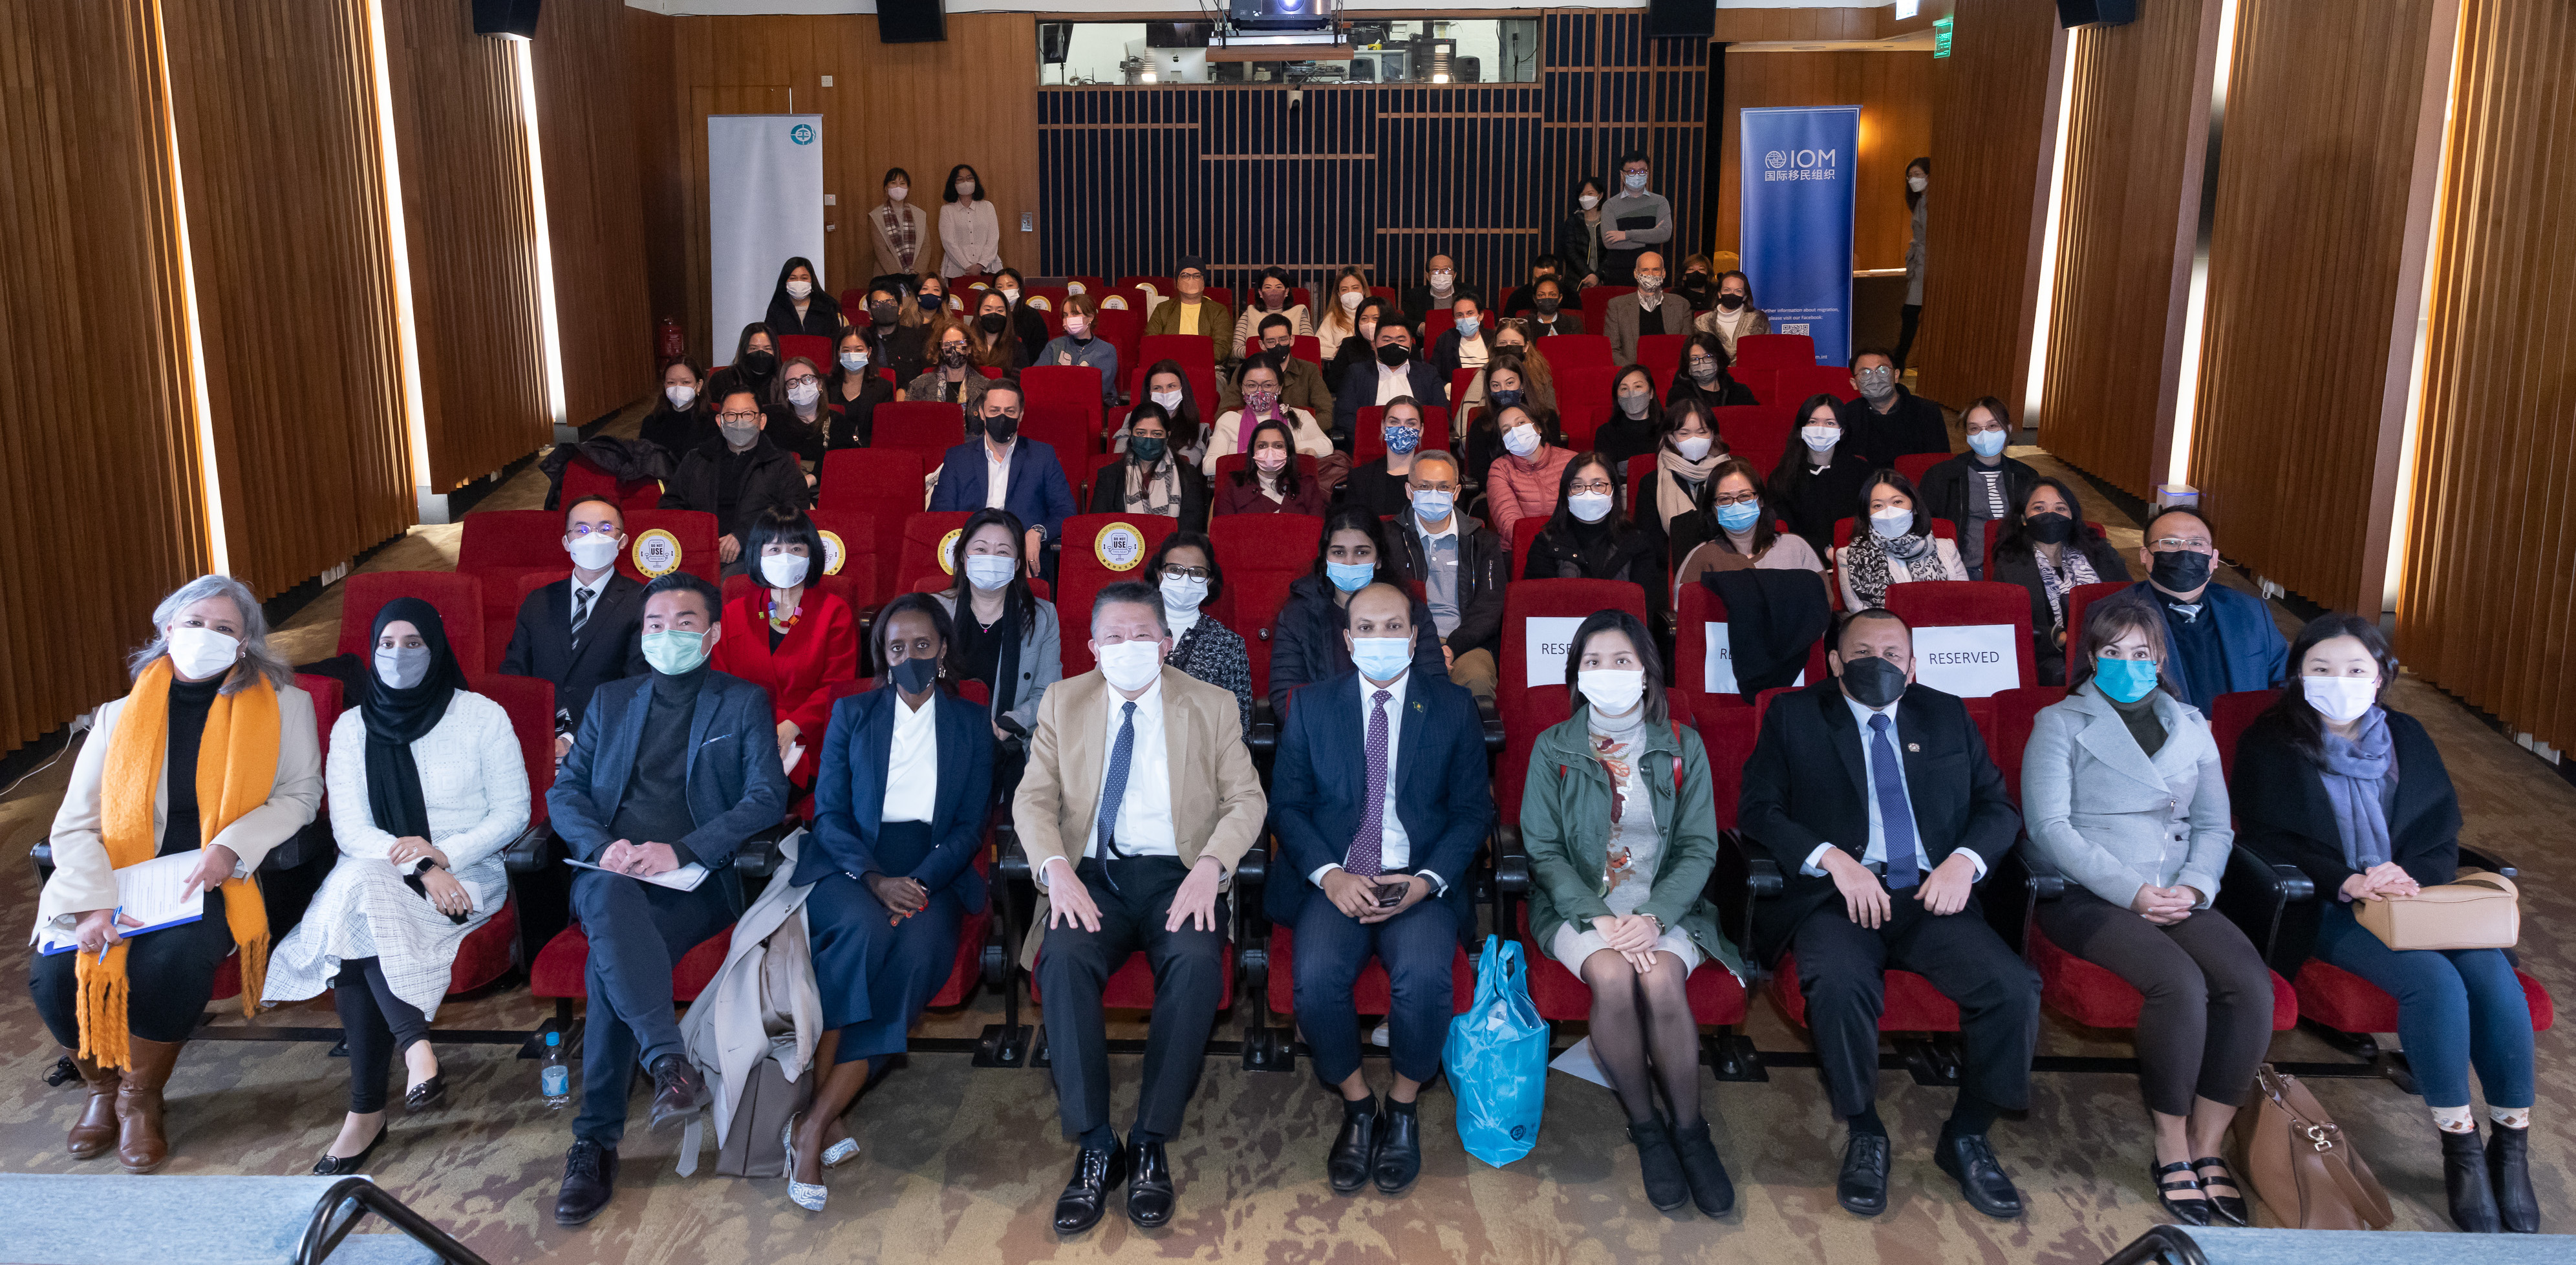 Representatives from the international community, civil society organizations and the private sector attended a panel discussion jointly organized by IOM and EOC. Photo: EOC 